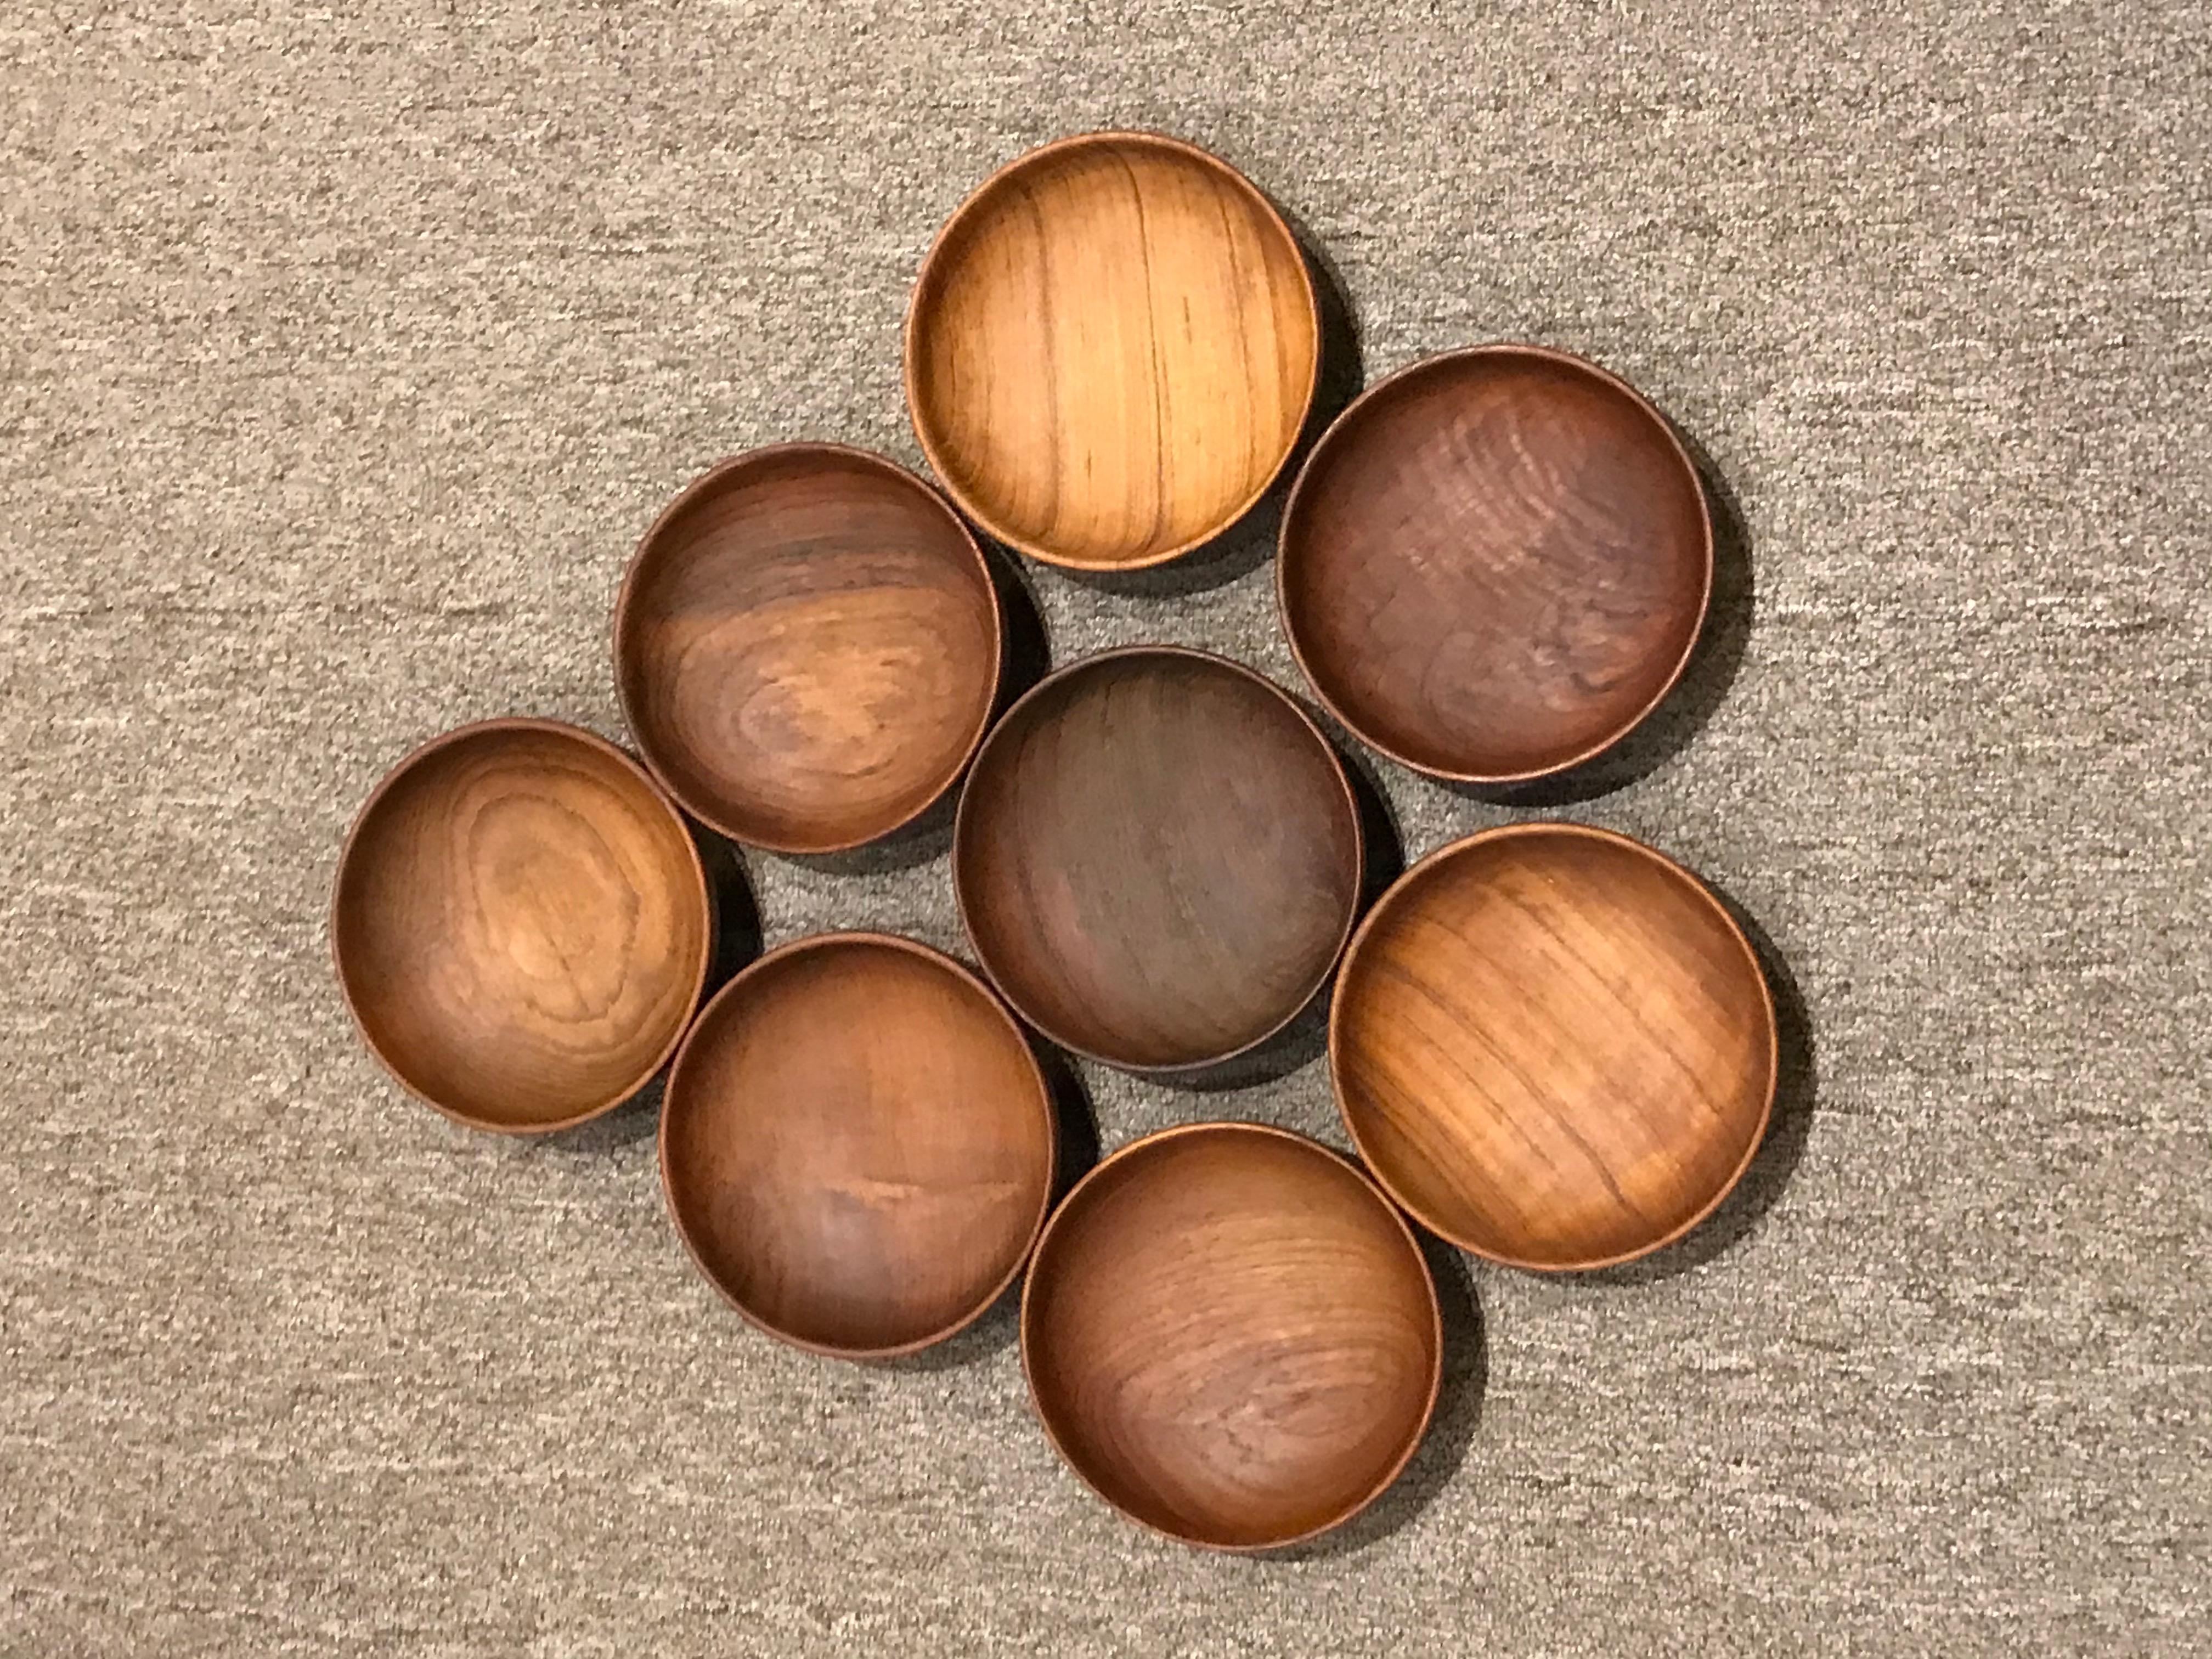 Set of 8 midcentury Danish modern ESA teak salad bowls by Erik S Angelo, Denmark from the 1960s. Beautiful grained teak used for this elegant designed footed bowls. Very Good condition. Would add warmth to any table setting.
Stamped on bottom: TEAK